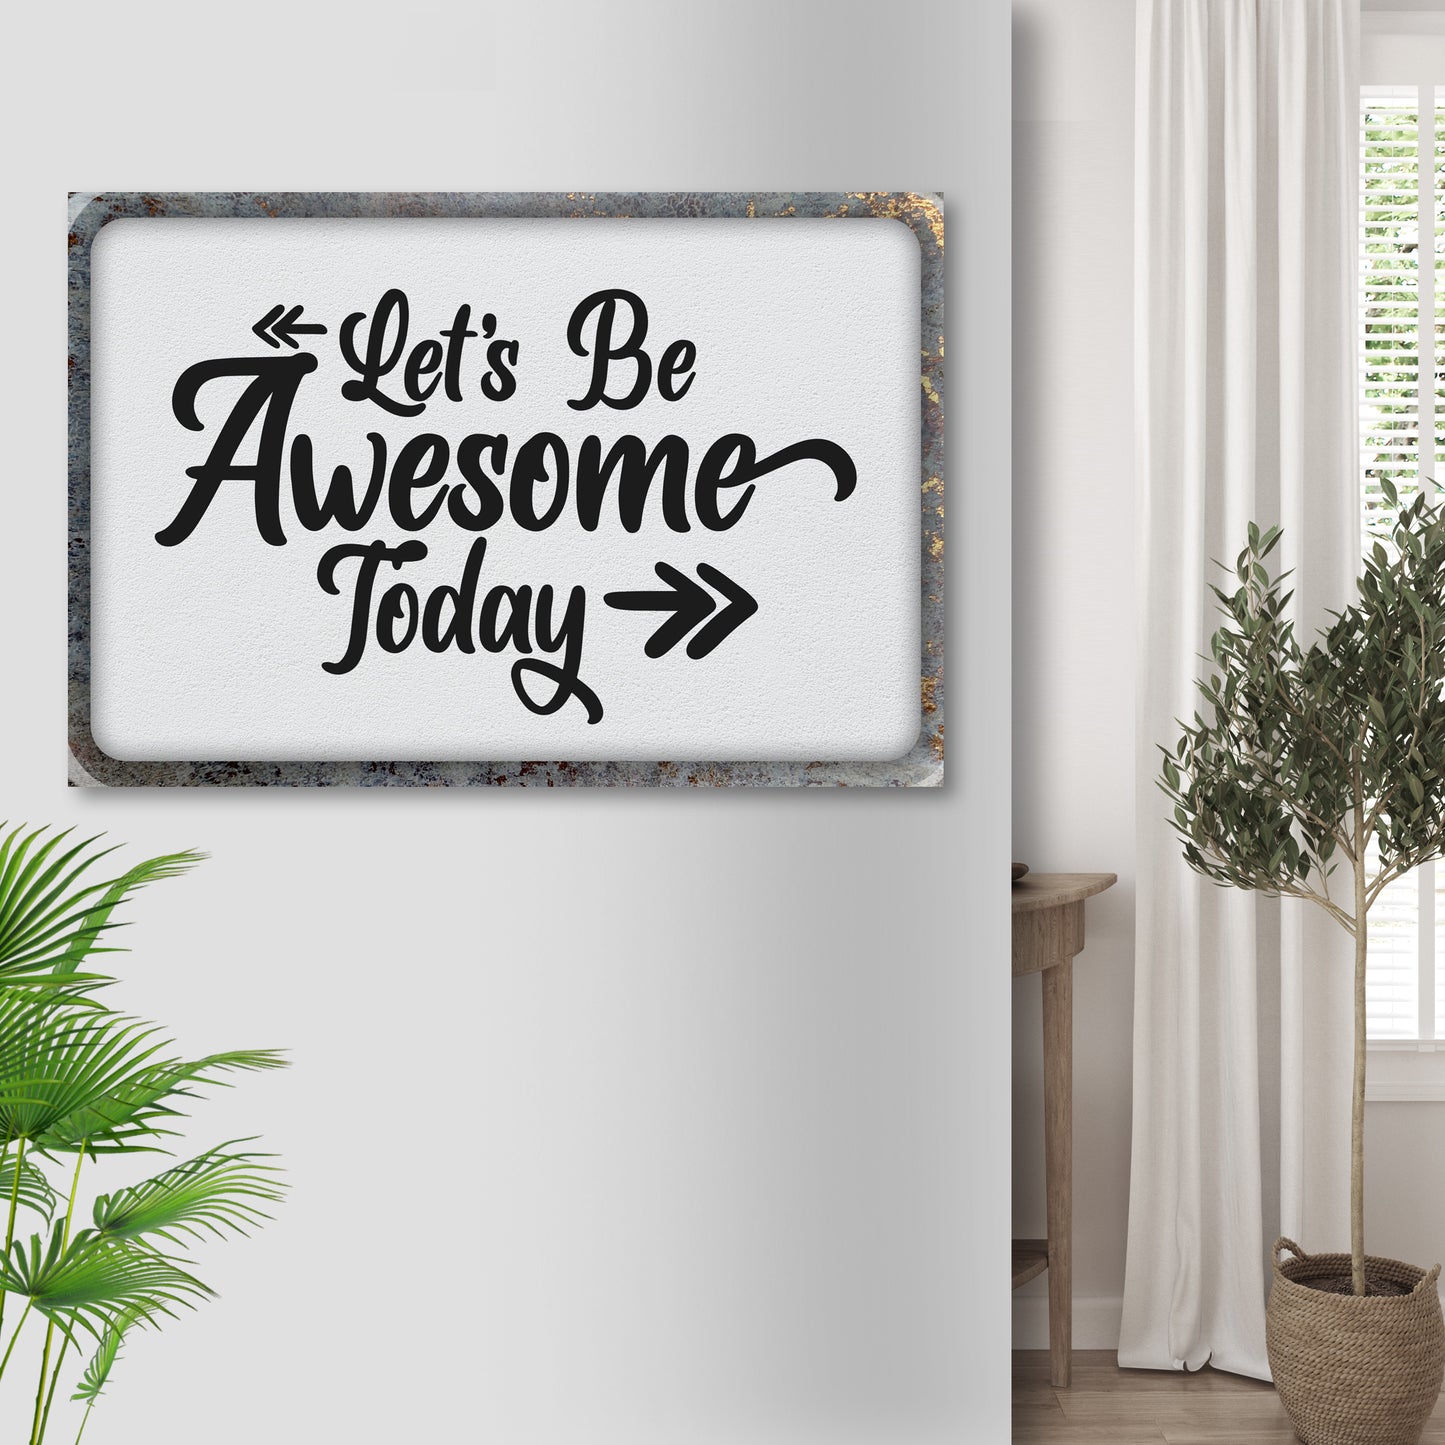 Let's Be Awesome Today Sign Style 1 - Image by Tailored Canvases